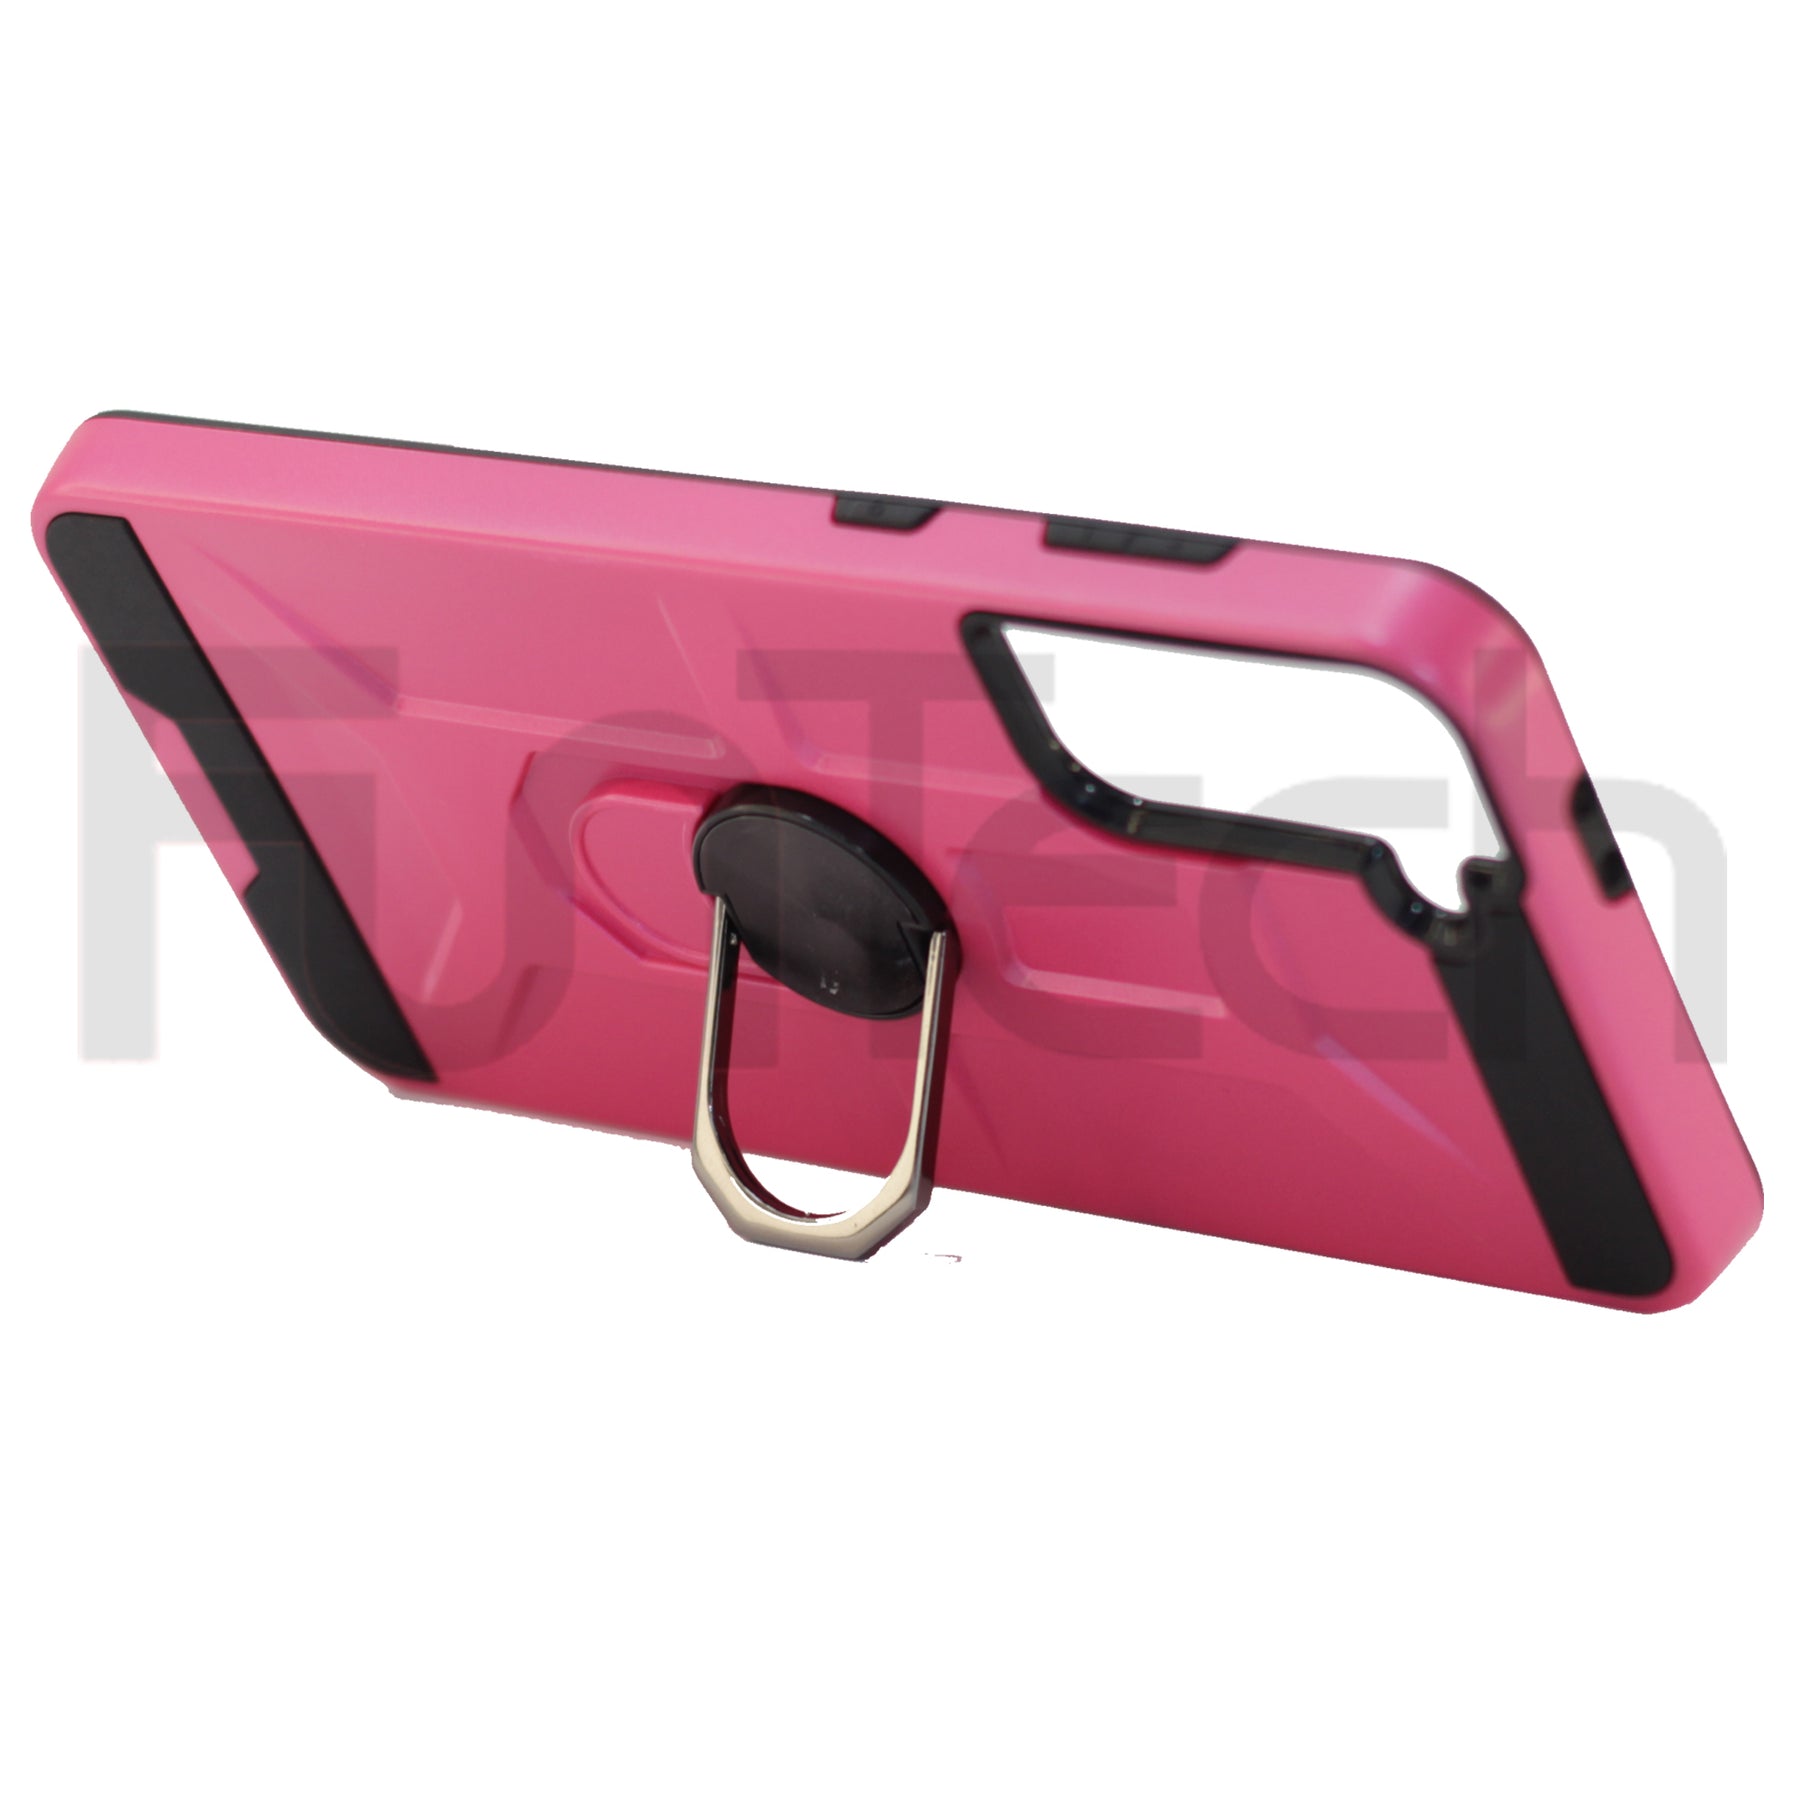 Samsung S21 Plus Ring Armor Case, Color Pink